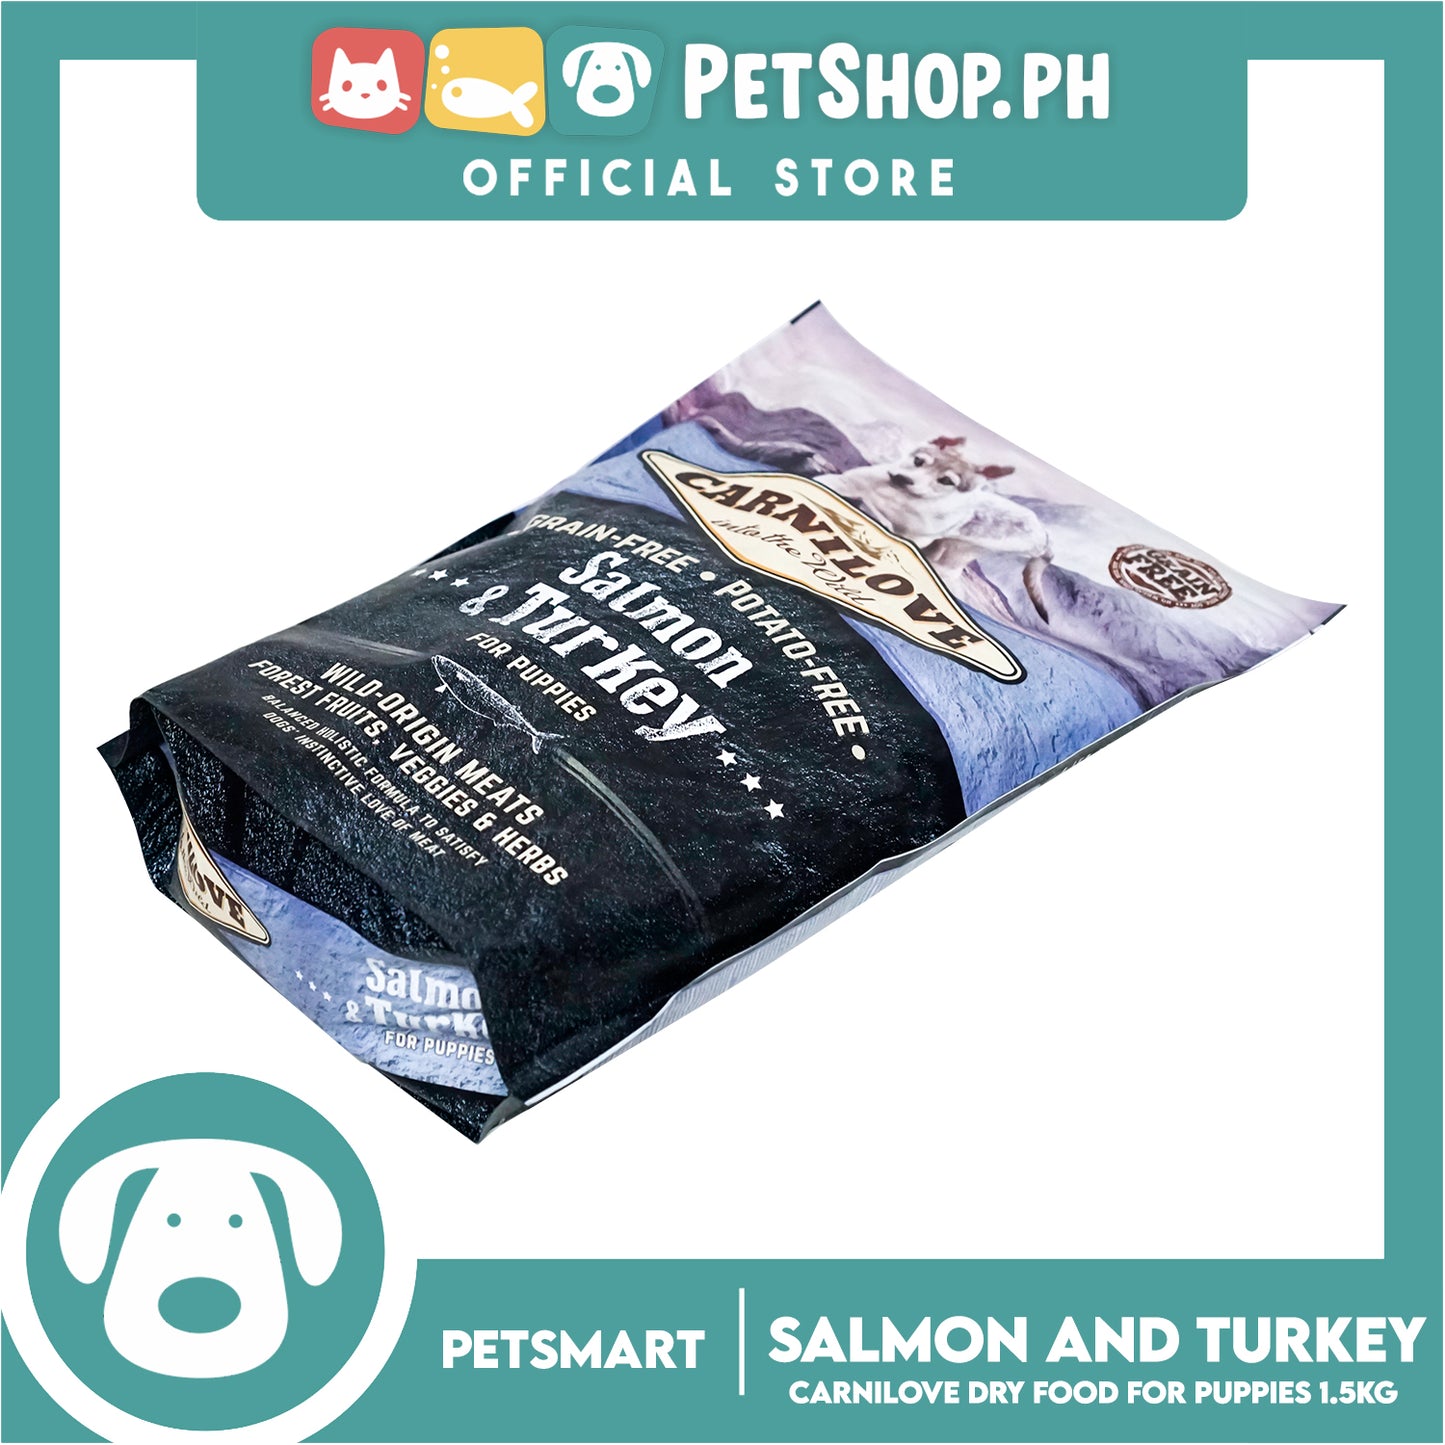 Carnilove Into The Wild Grain-Free and Potato-Free Salmon and Turkey For Puppies 1.5kg Dry Dog Food